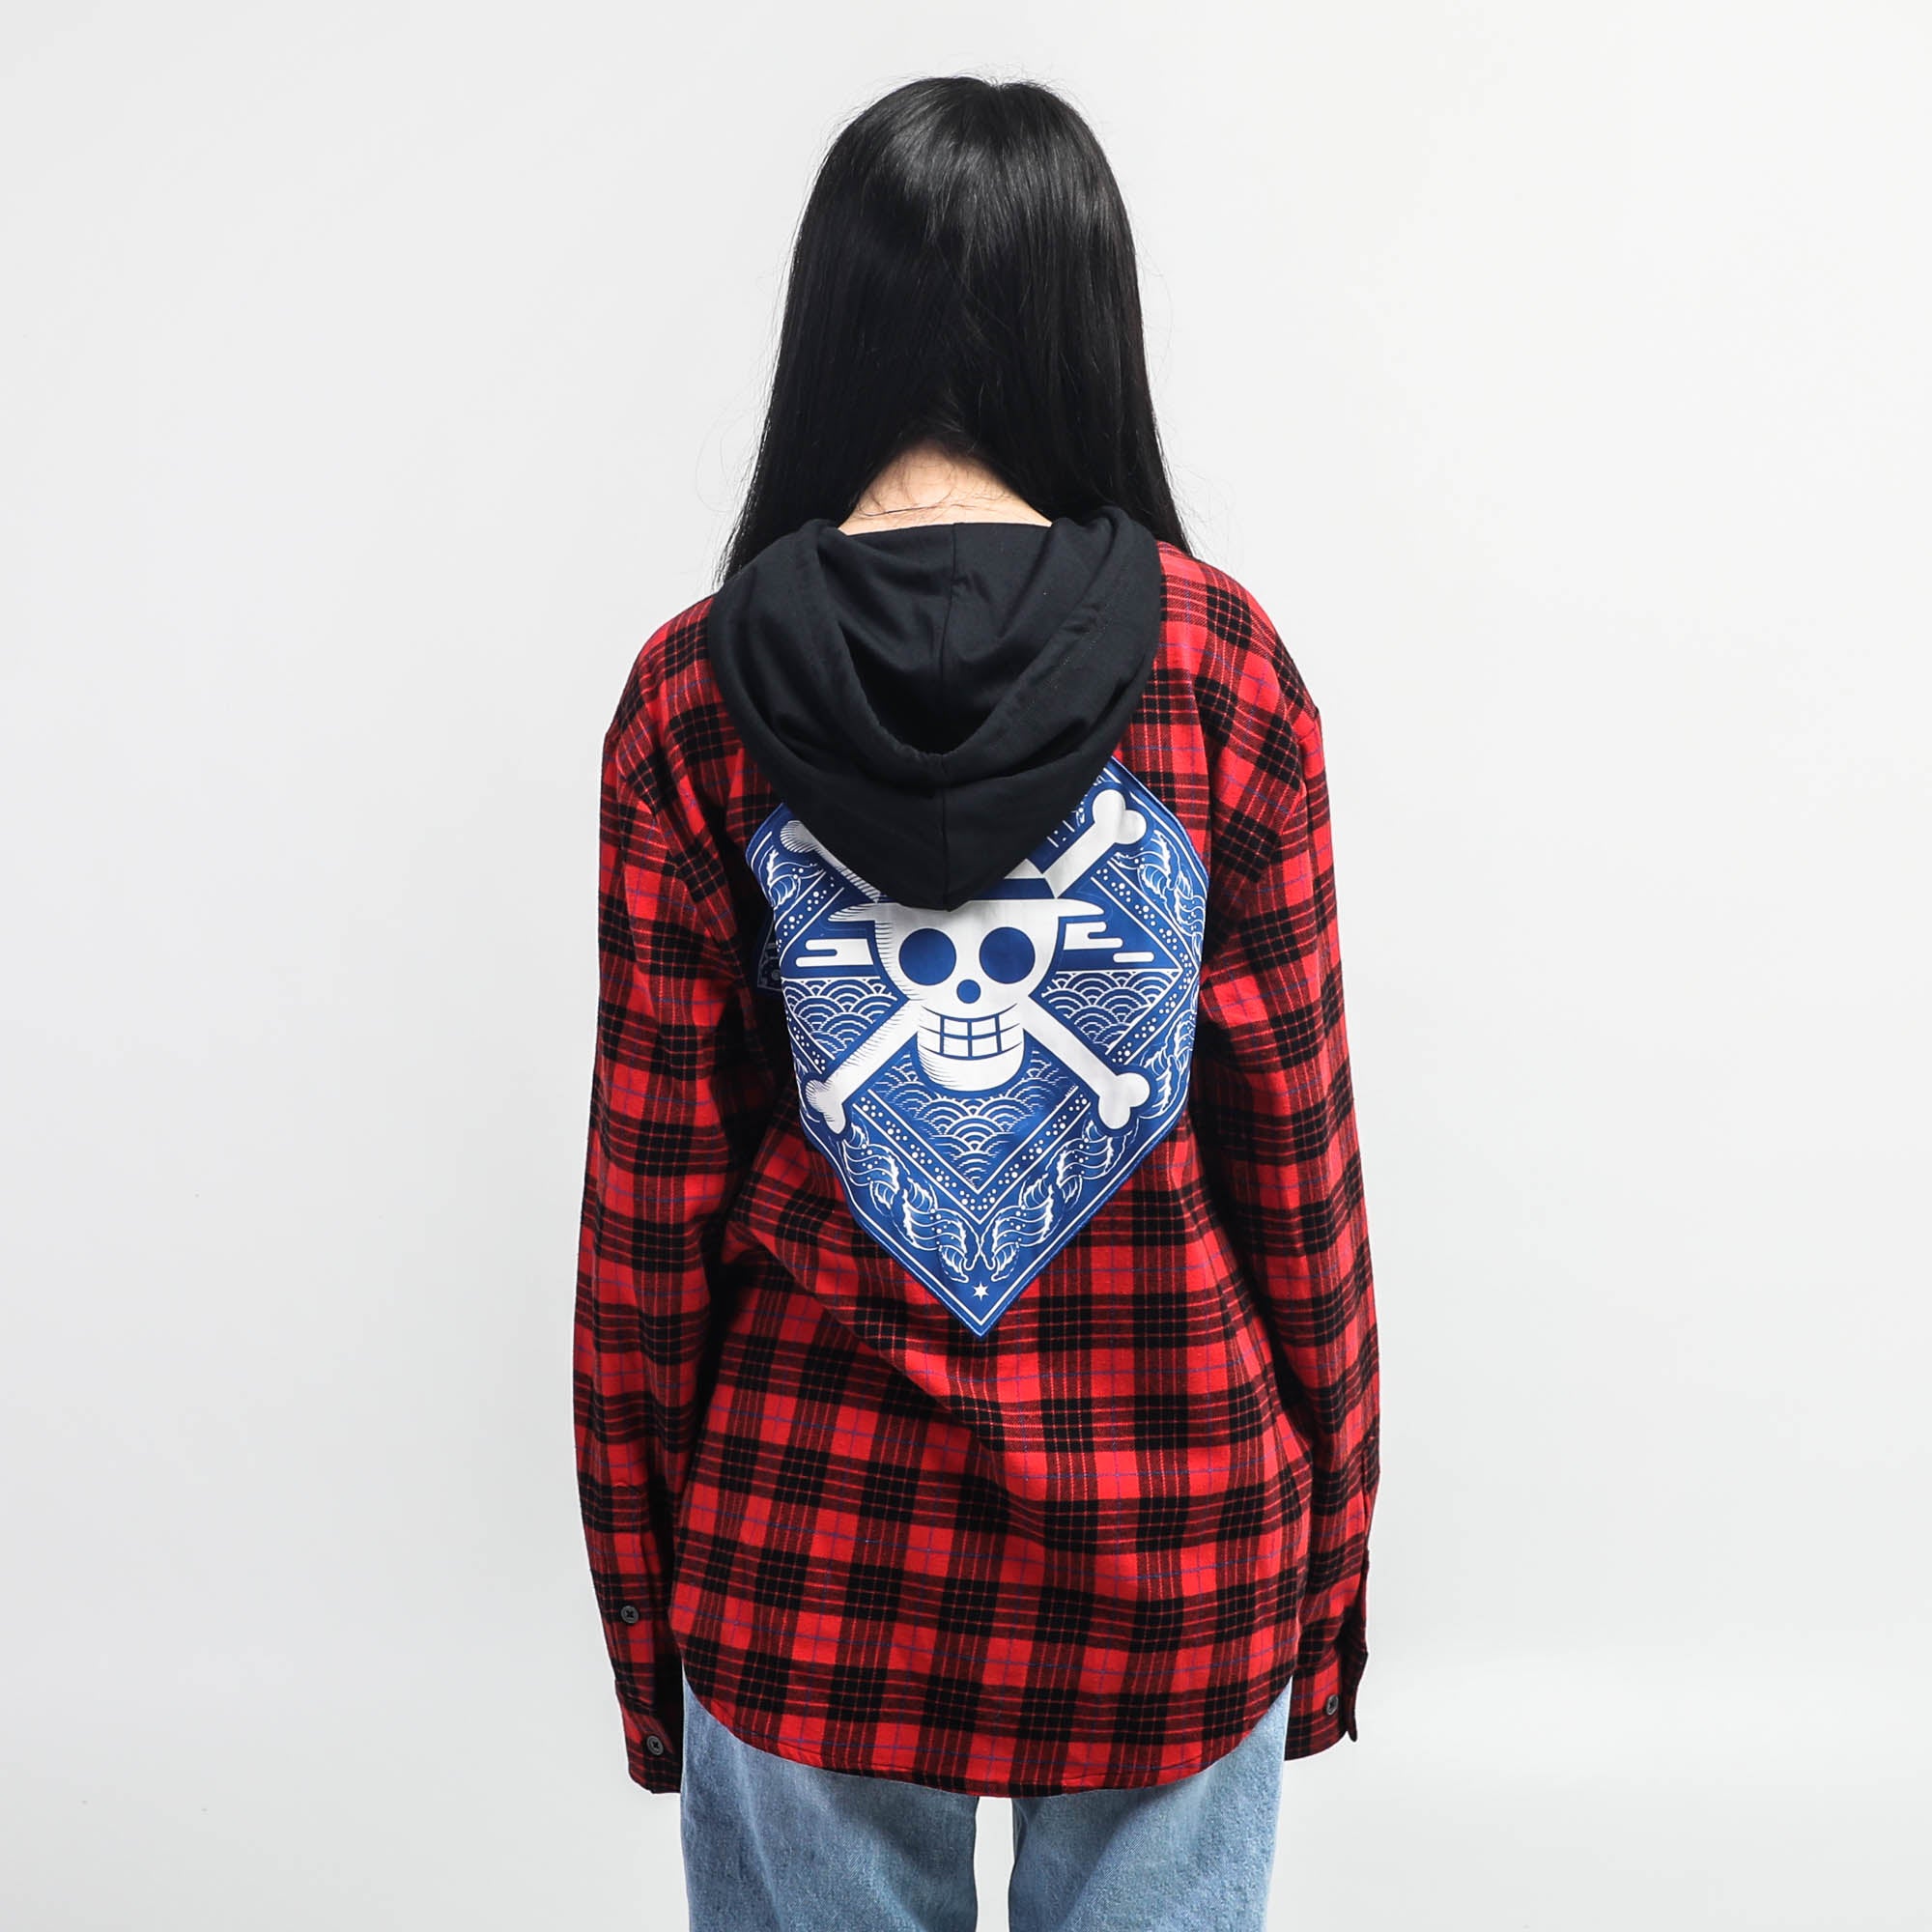 Straw Hat Crew Hooded Flannel